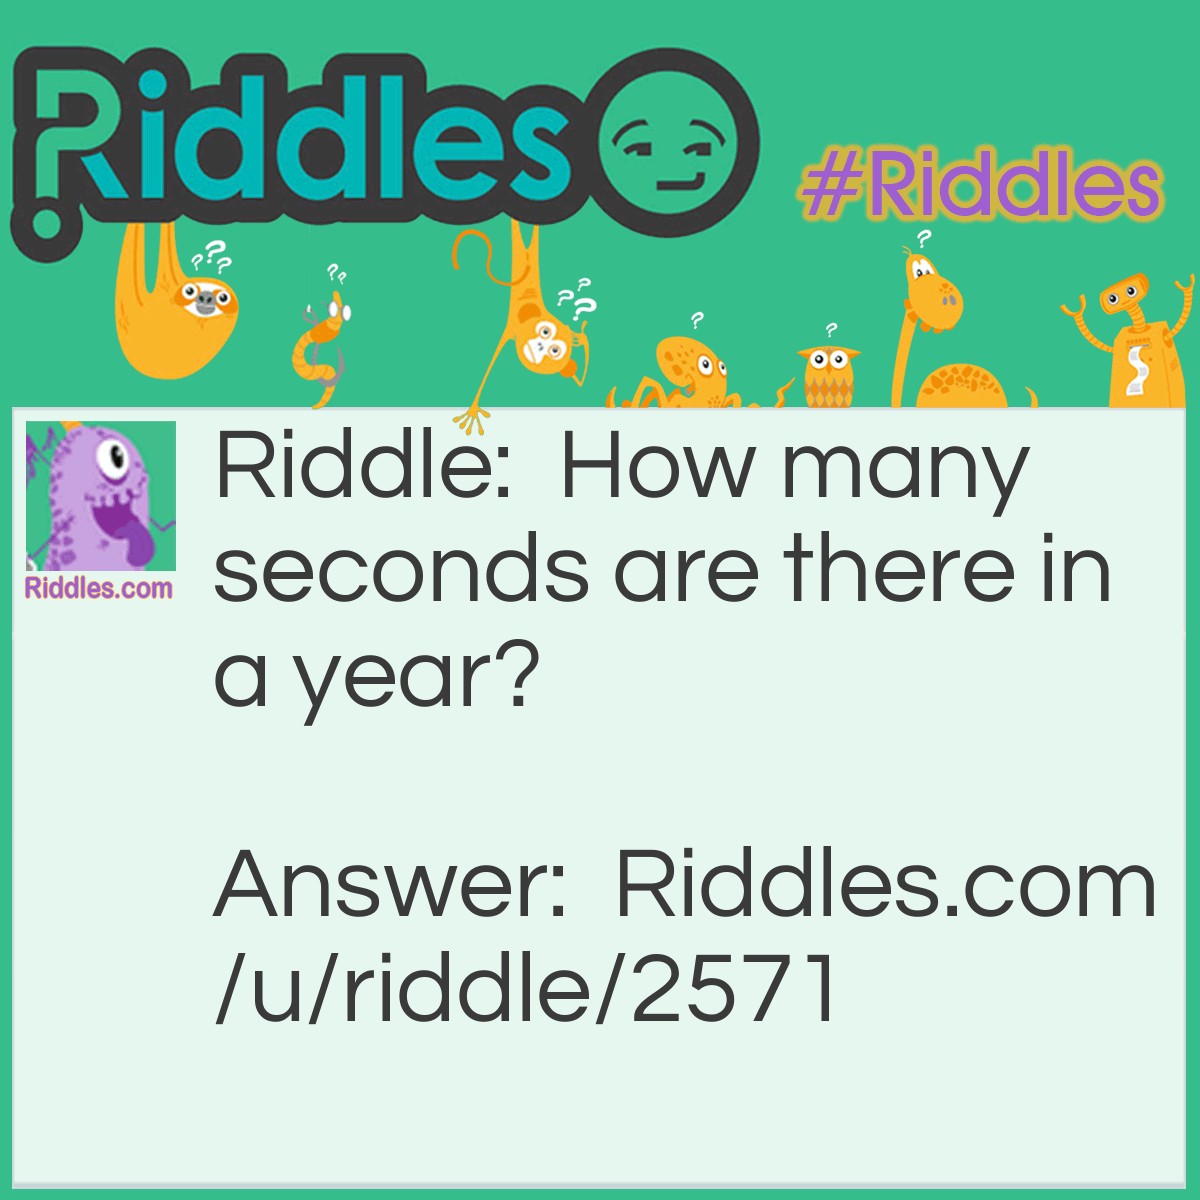 Riddle: How many seconds are there in a year? Answer: 12. January second, February second, March second...